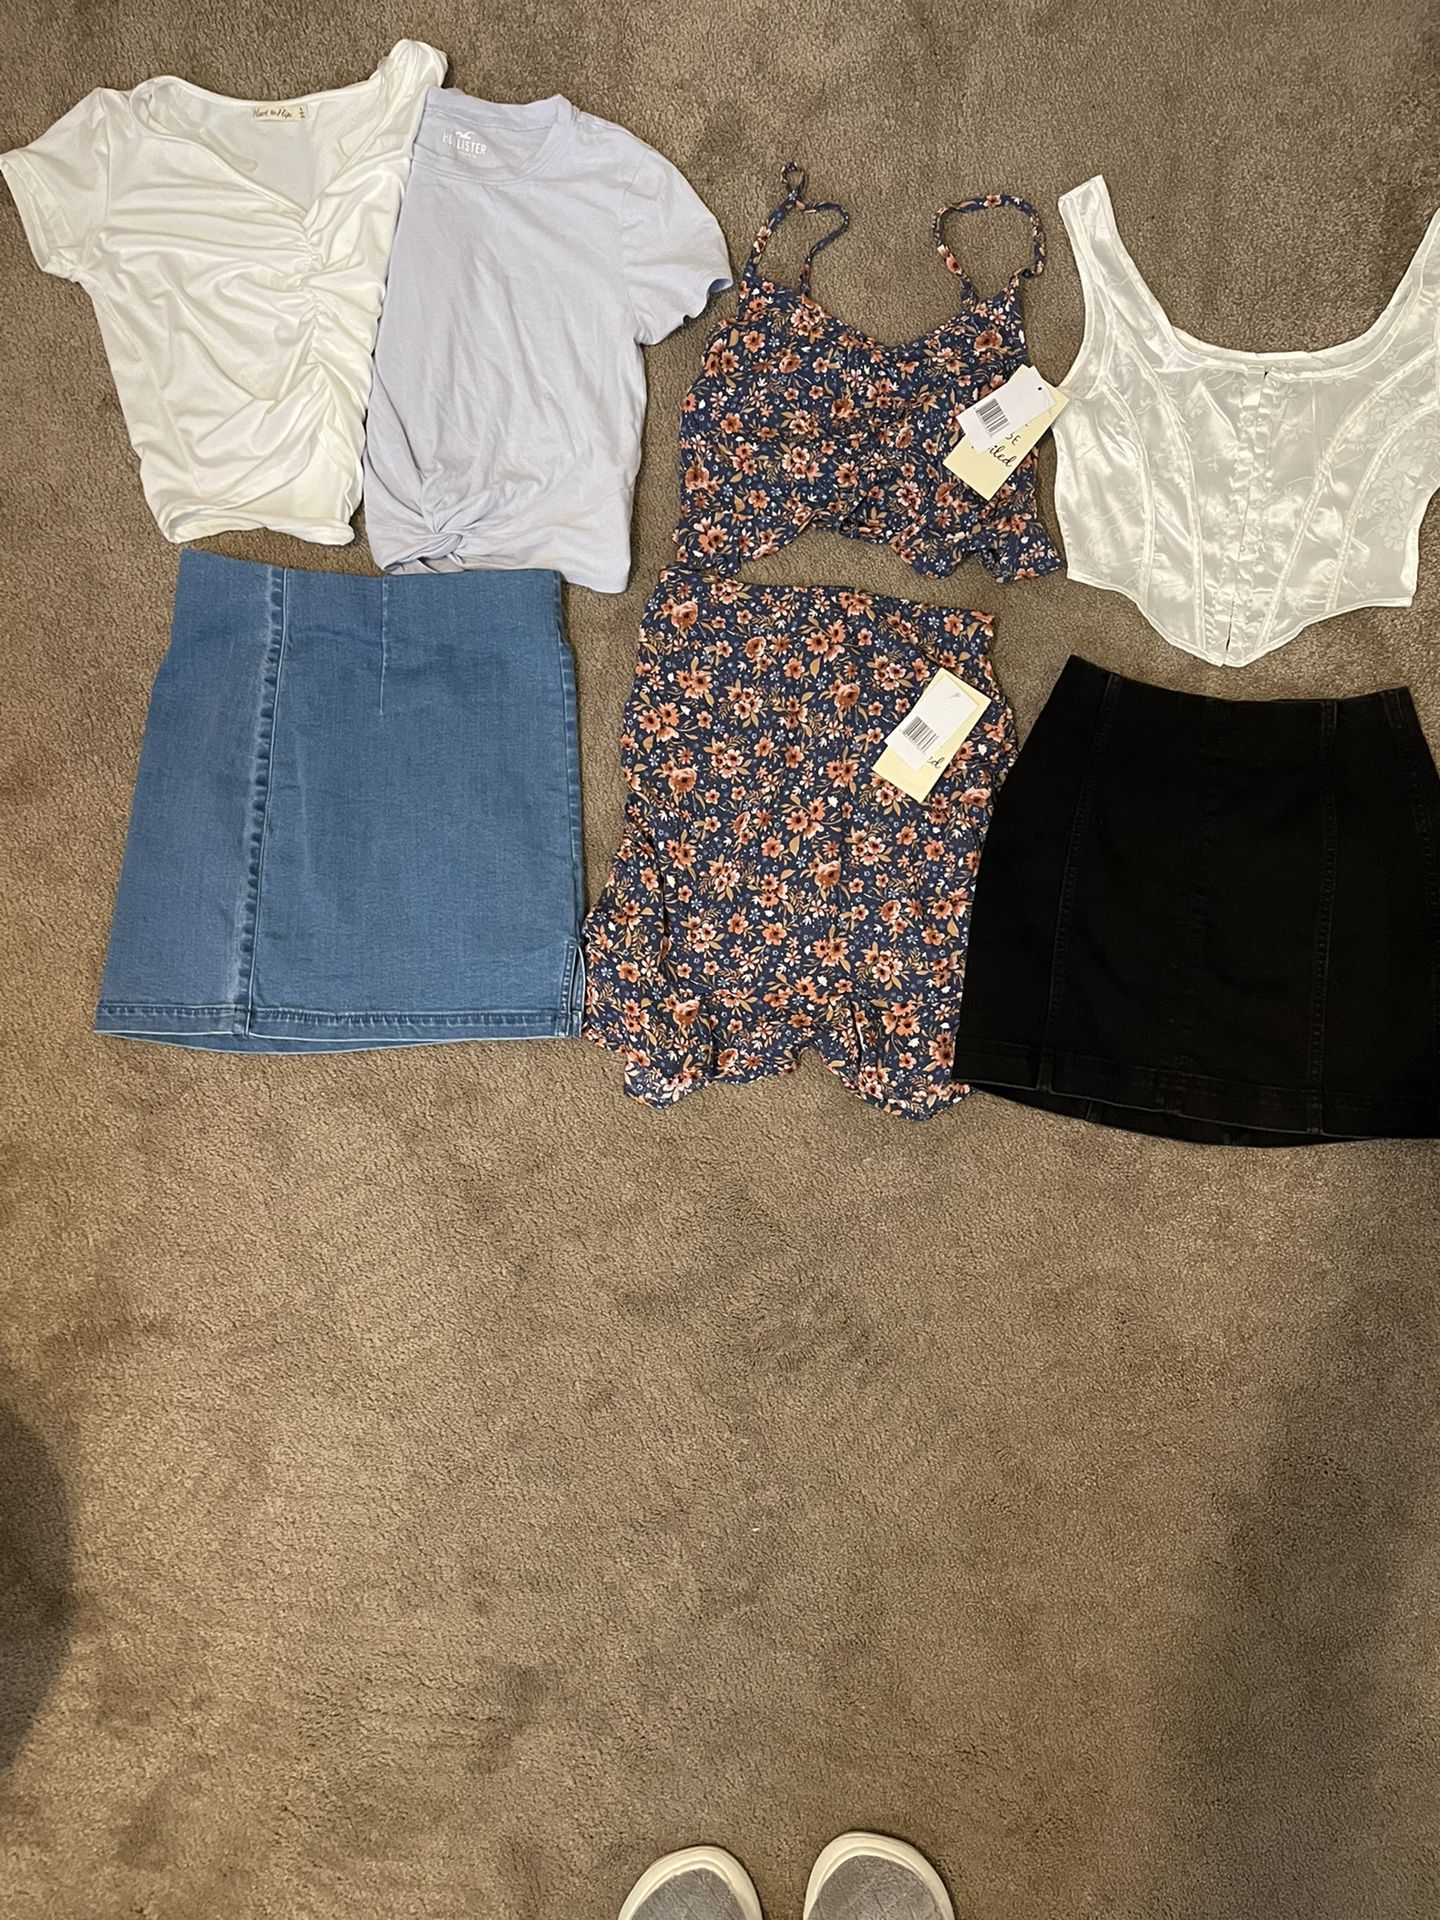 Three women’s outfits